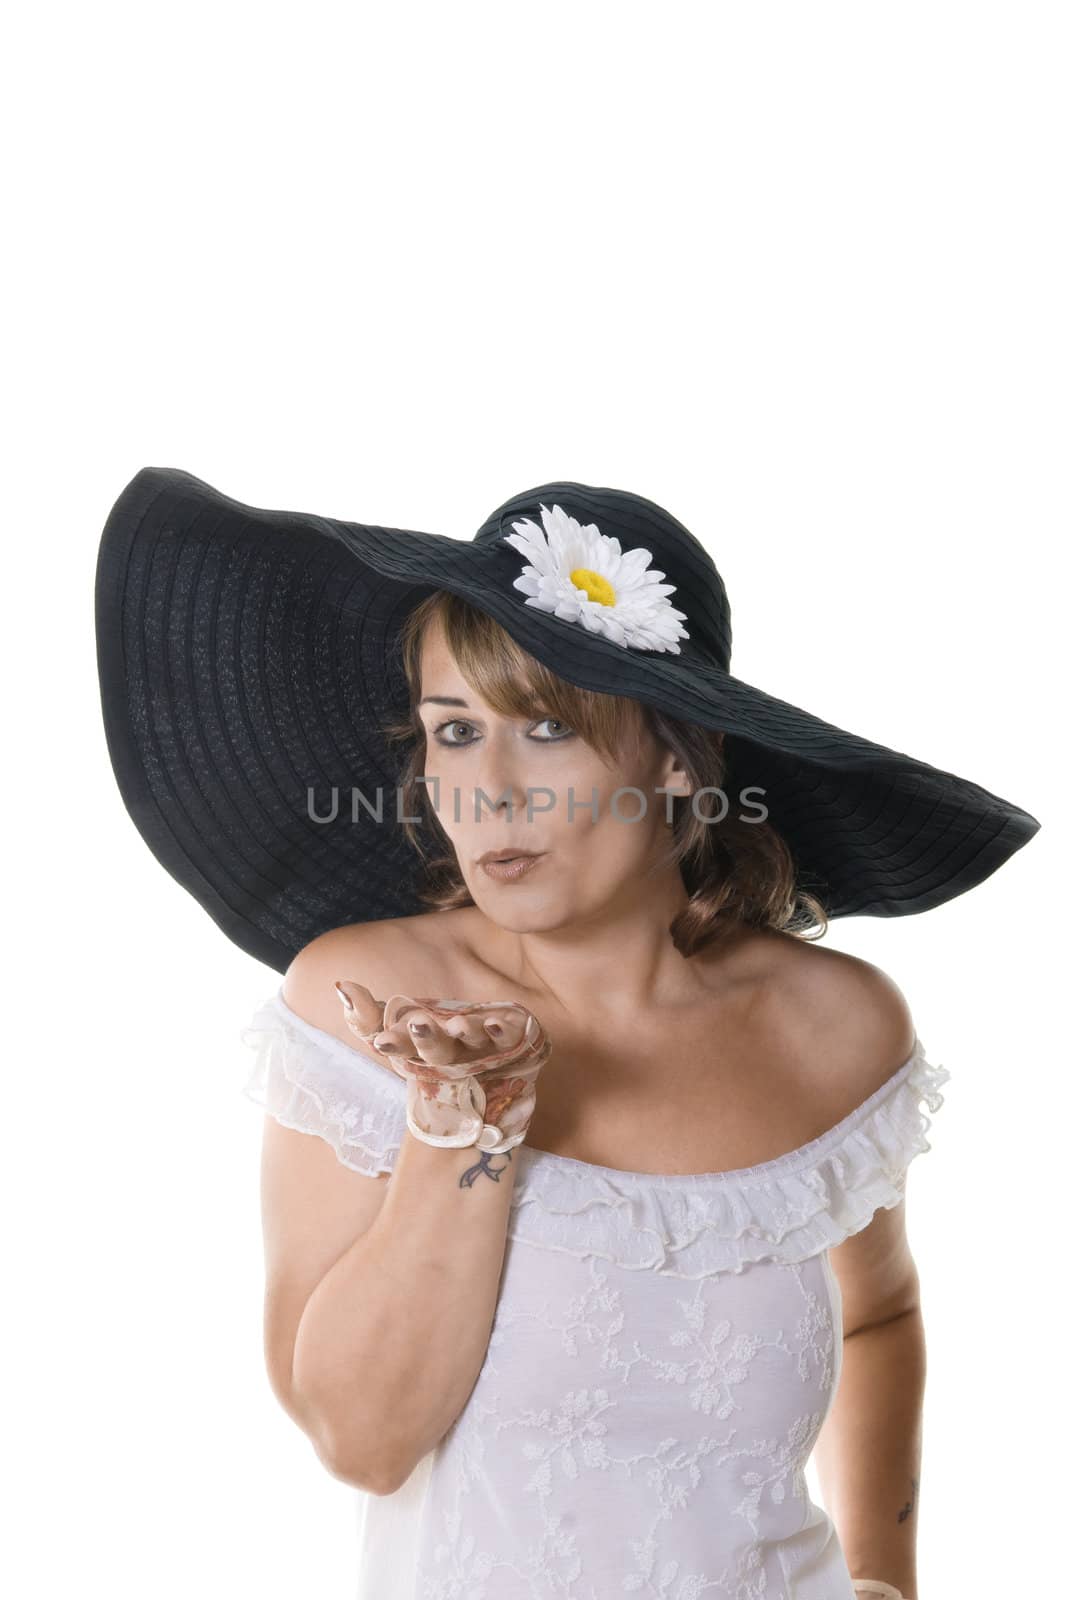 Studio portrait of attractive woman in a large black hat isolated on white